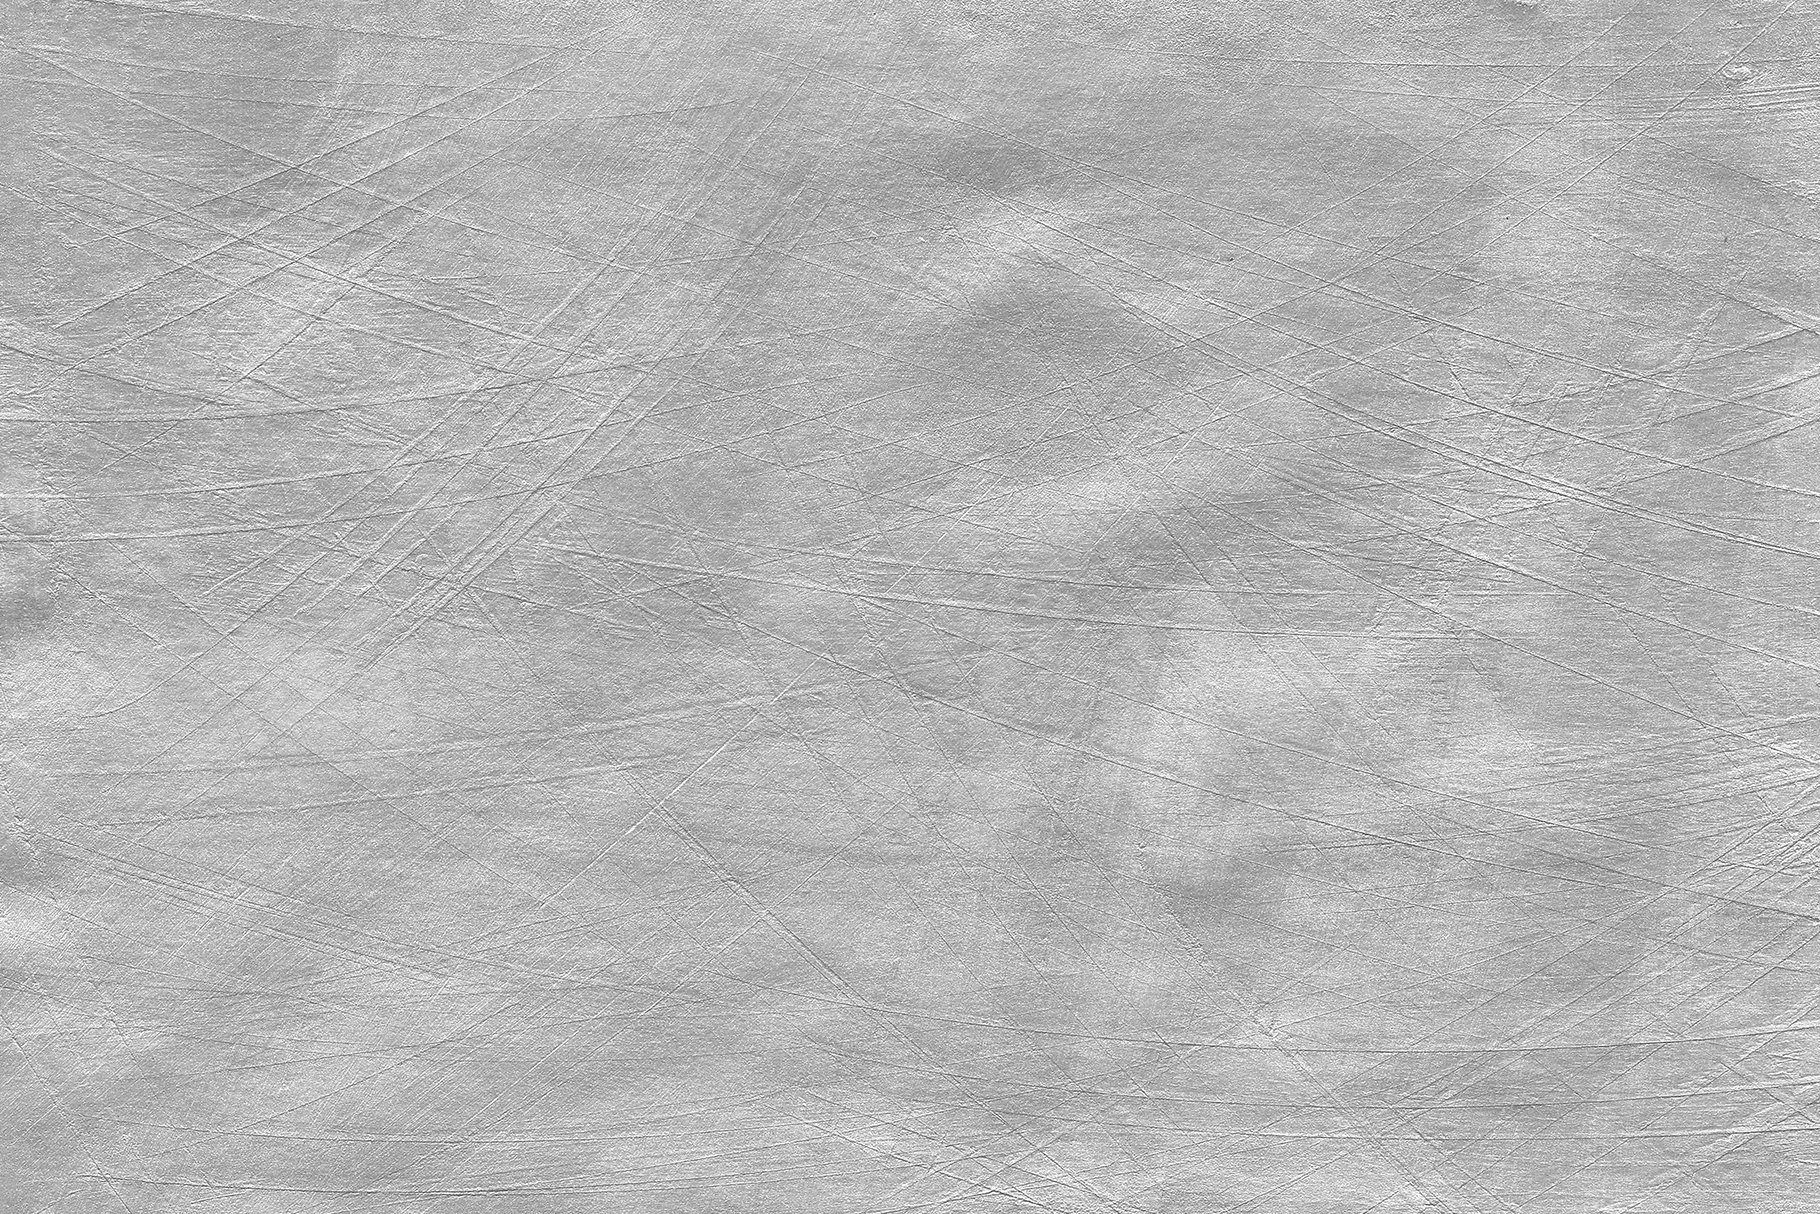 cut pattern silver texture background 167